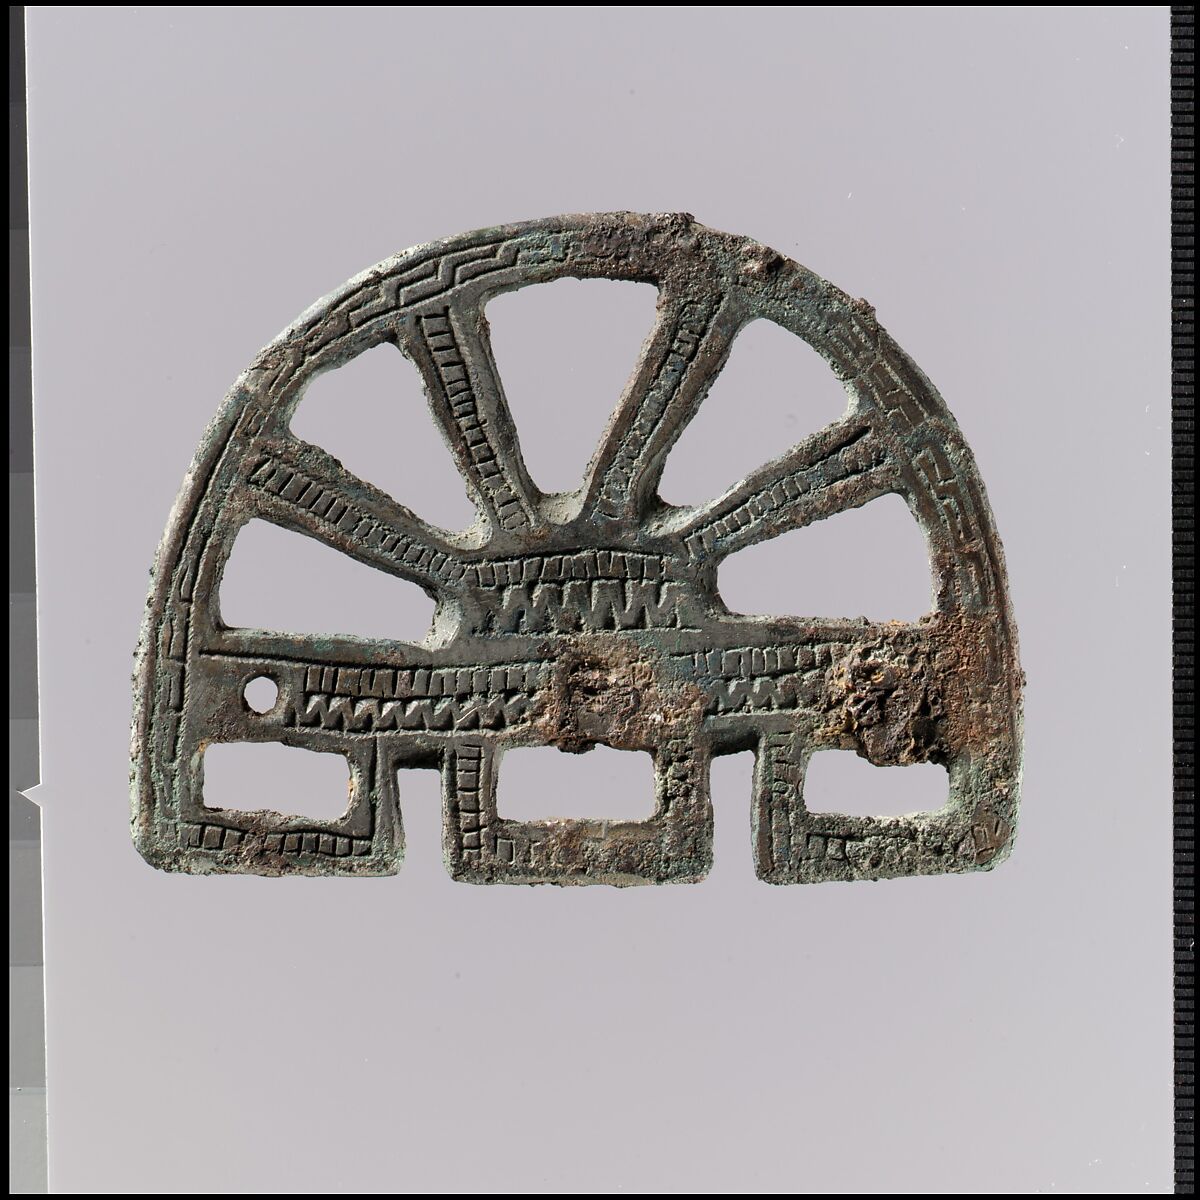 Openwork Plaque, Copper alloy (leaded bronze), "tinned" surface, Frankish 